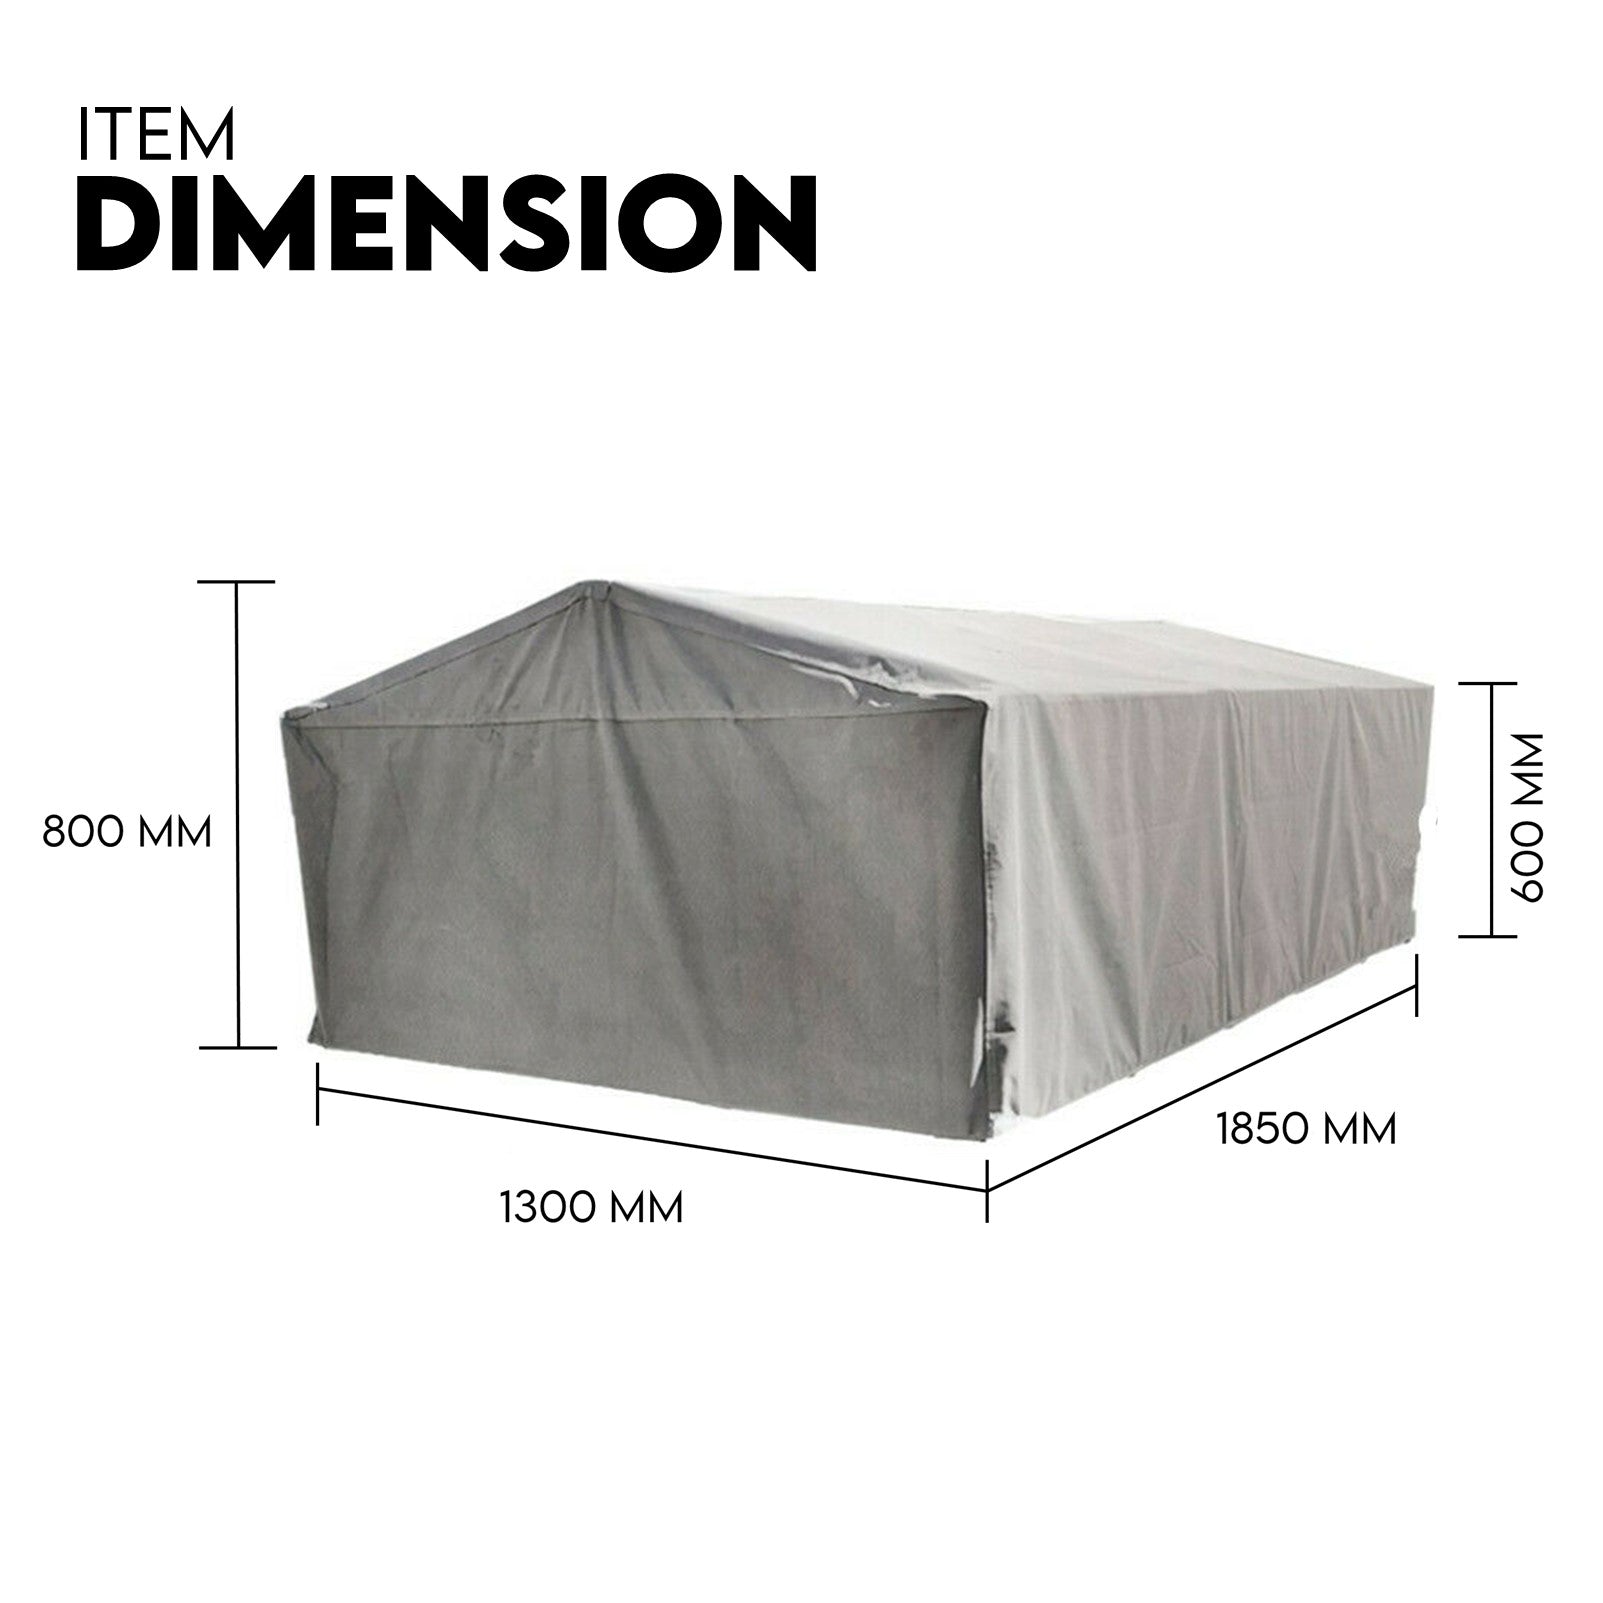 Trailer Cage Cover 6x4